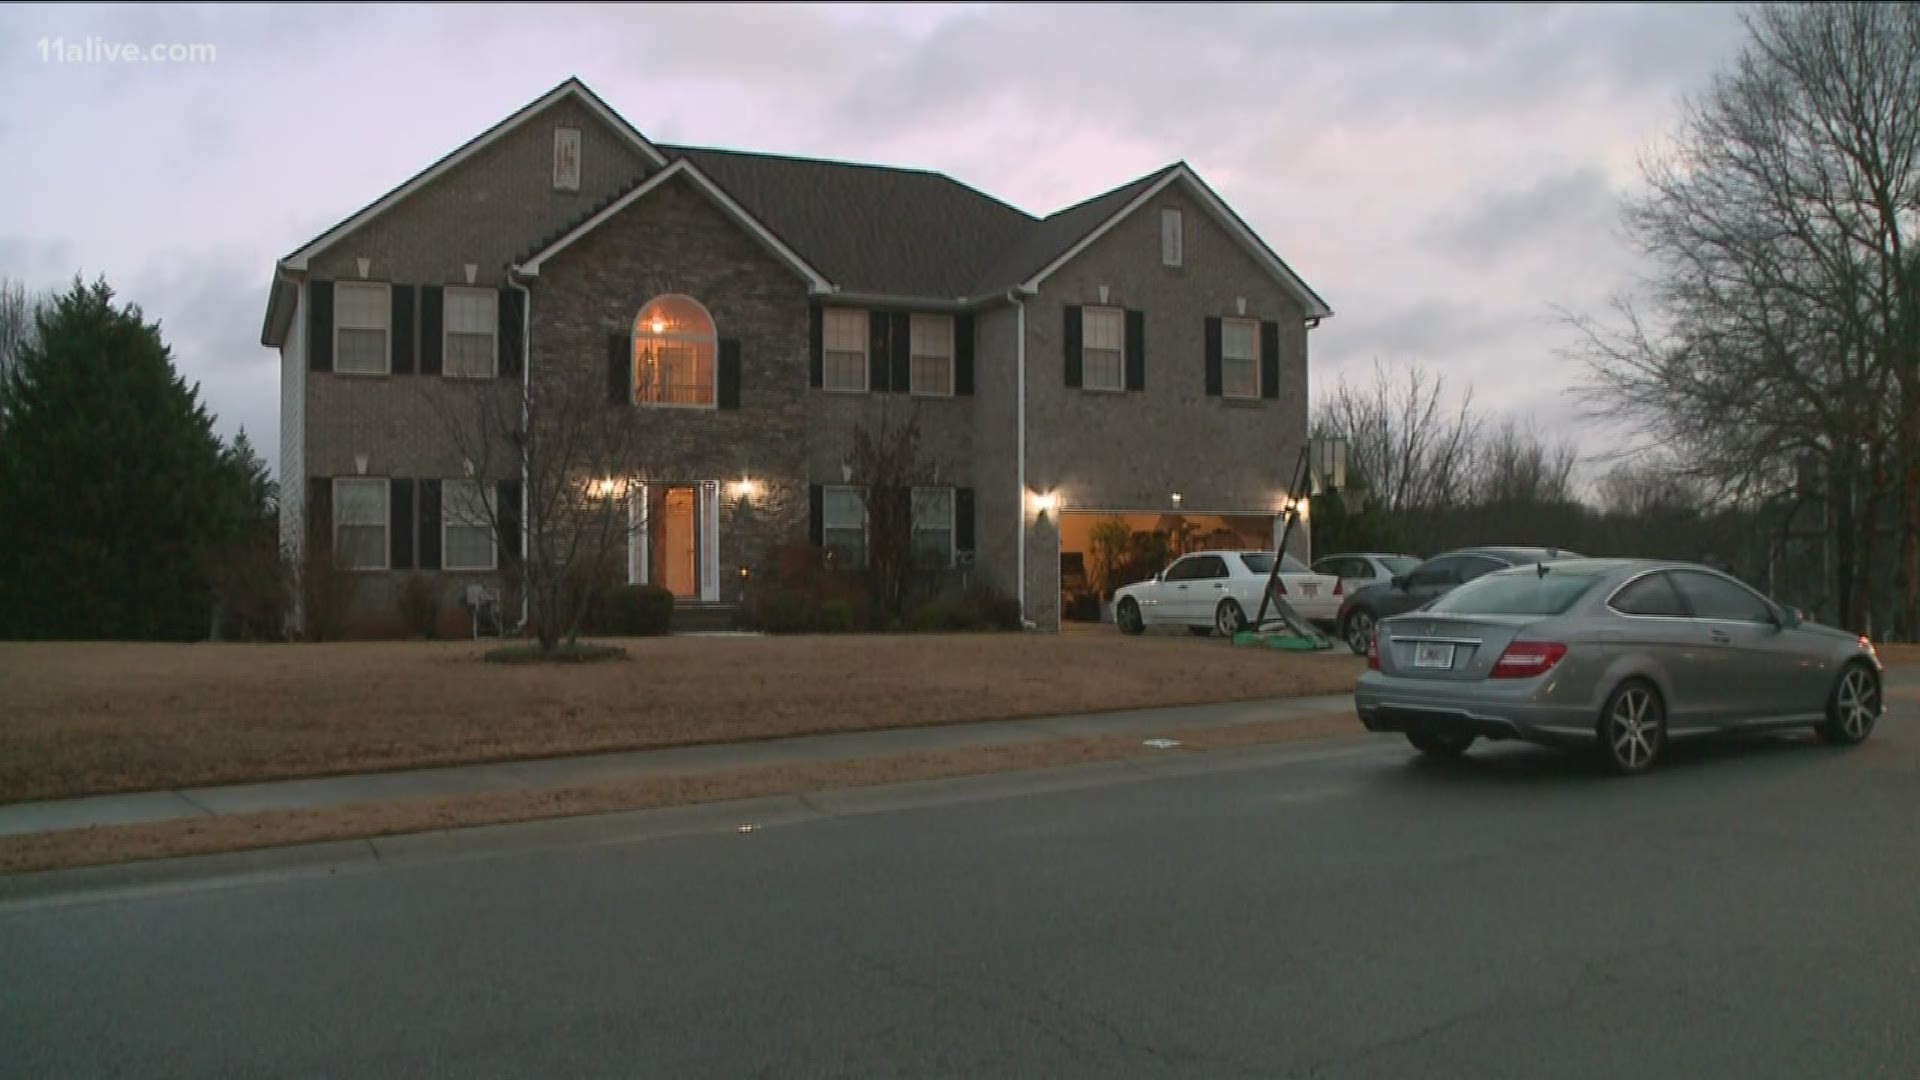 Investigators said that a family member found the two victims shot to death in a bedroom.